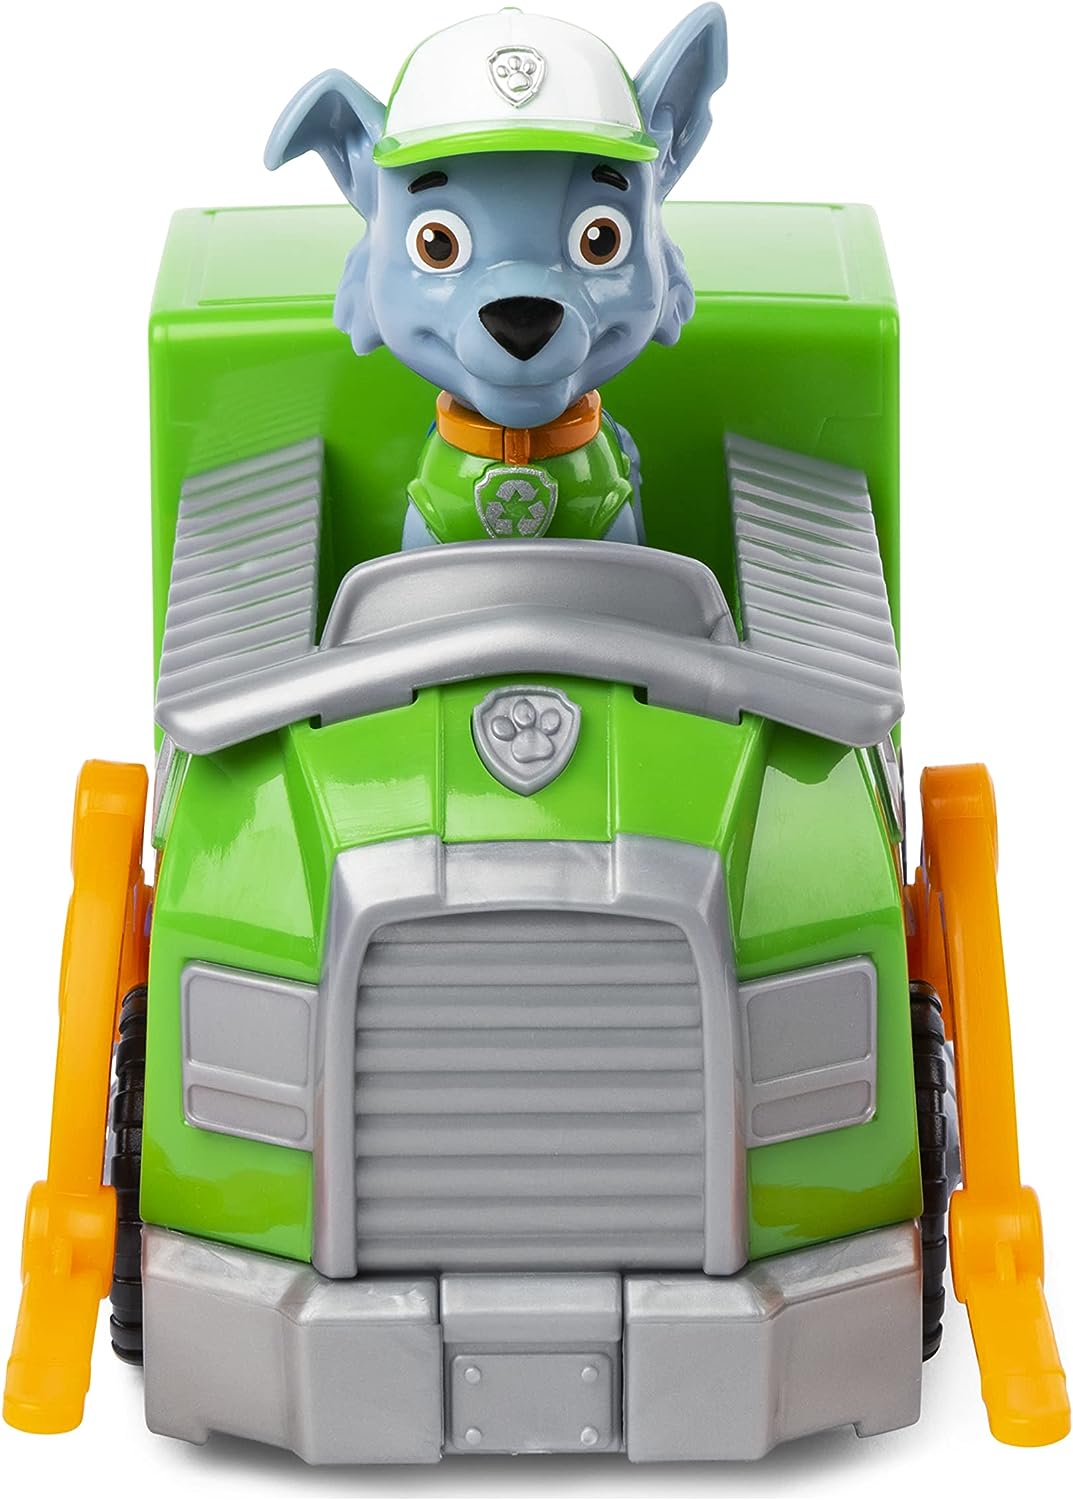 PAW Patrol, Rocky’s Recycling Truck Vehicle with Collectible Figure